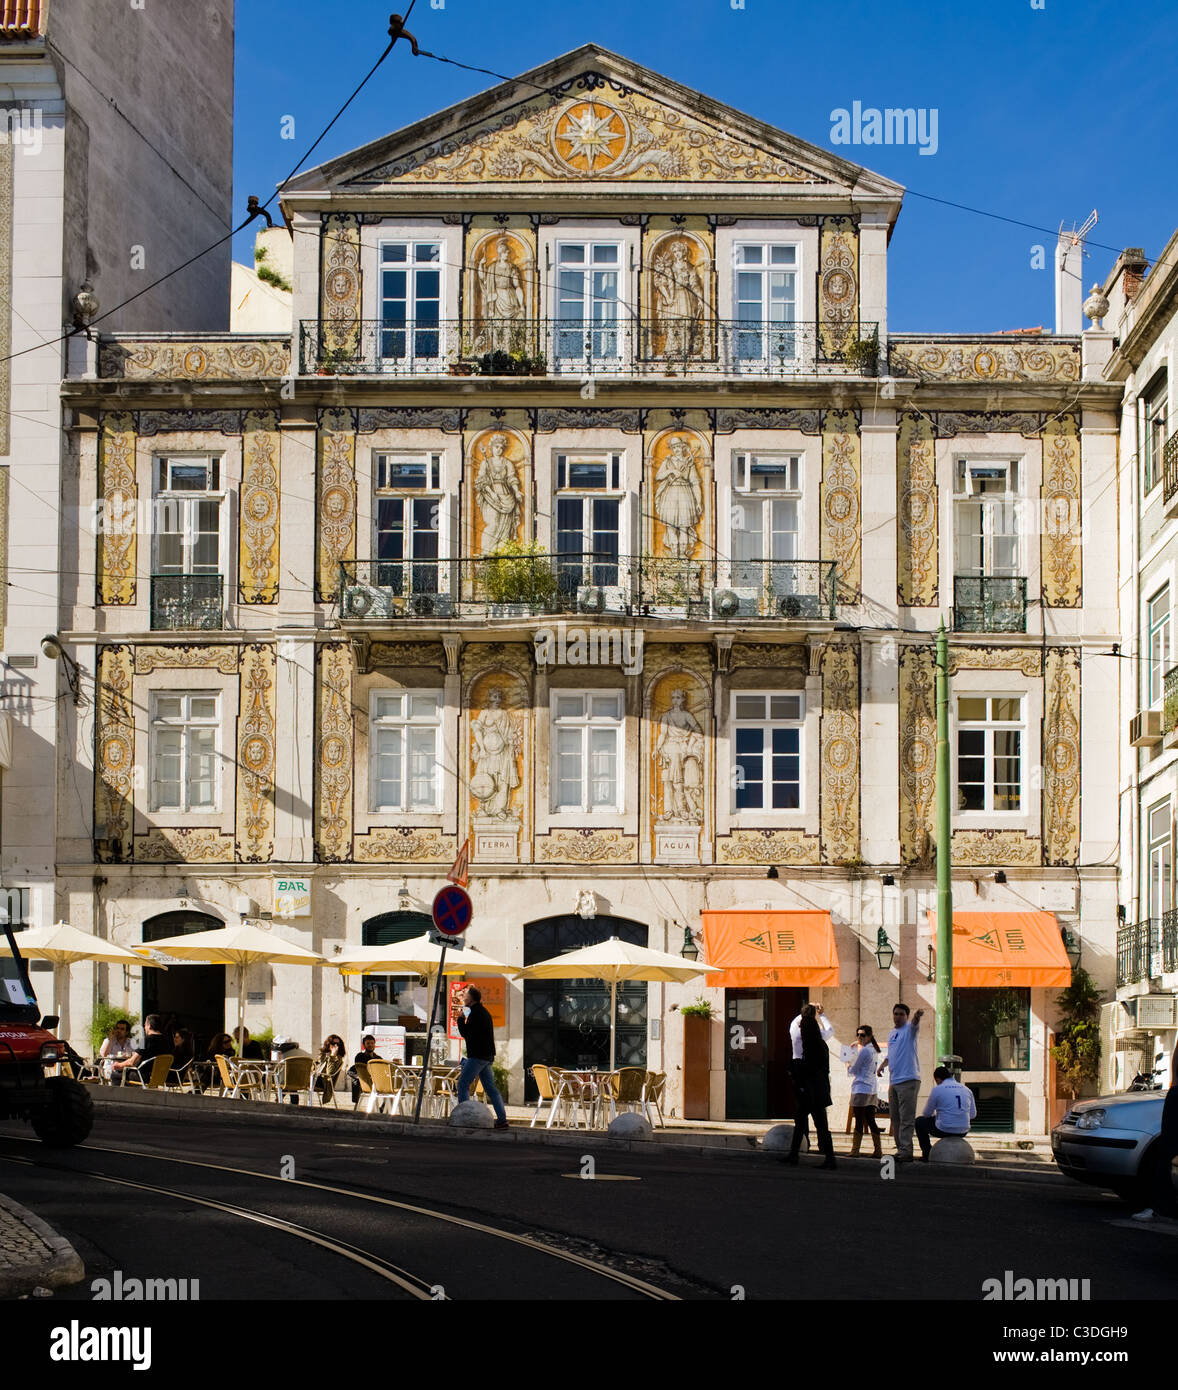 Azulejos (painted tiles) decorating a building in Lisbon, Portugal Stock Photo